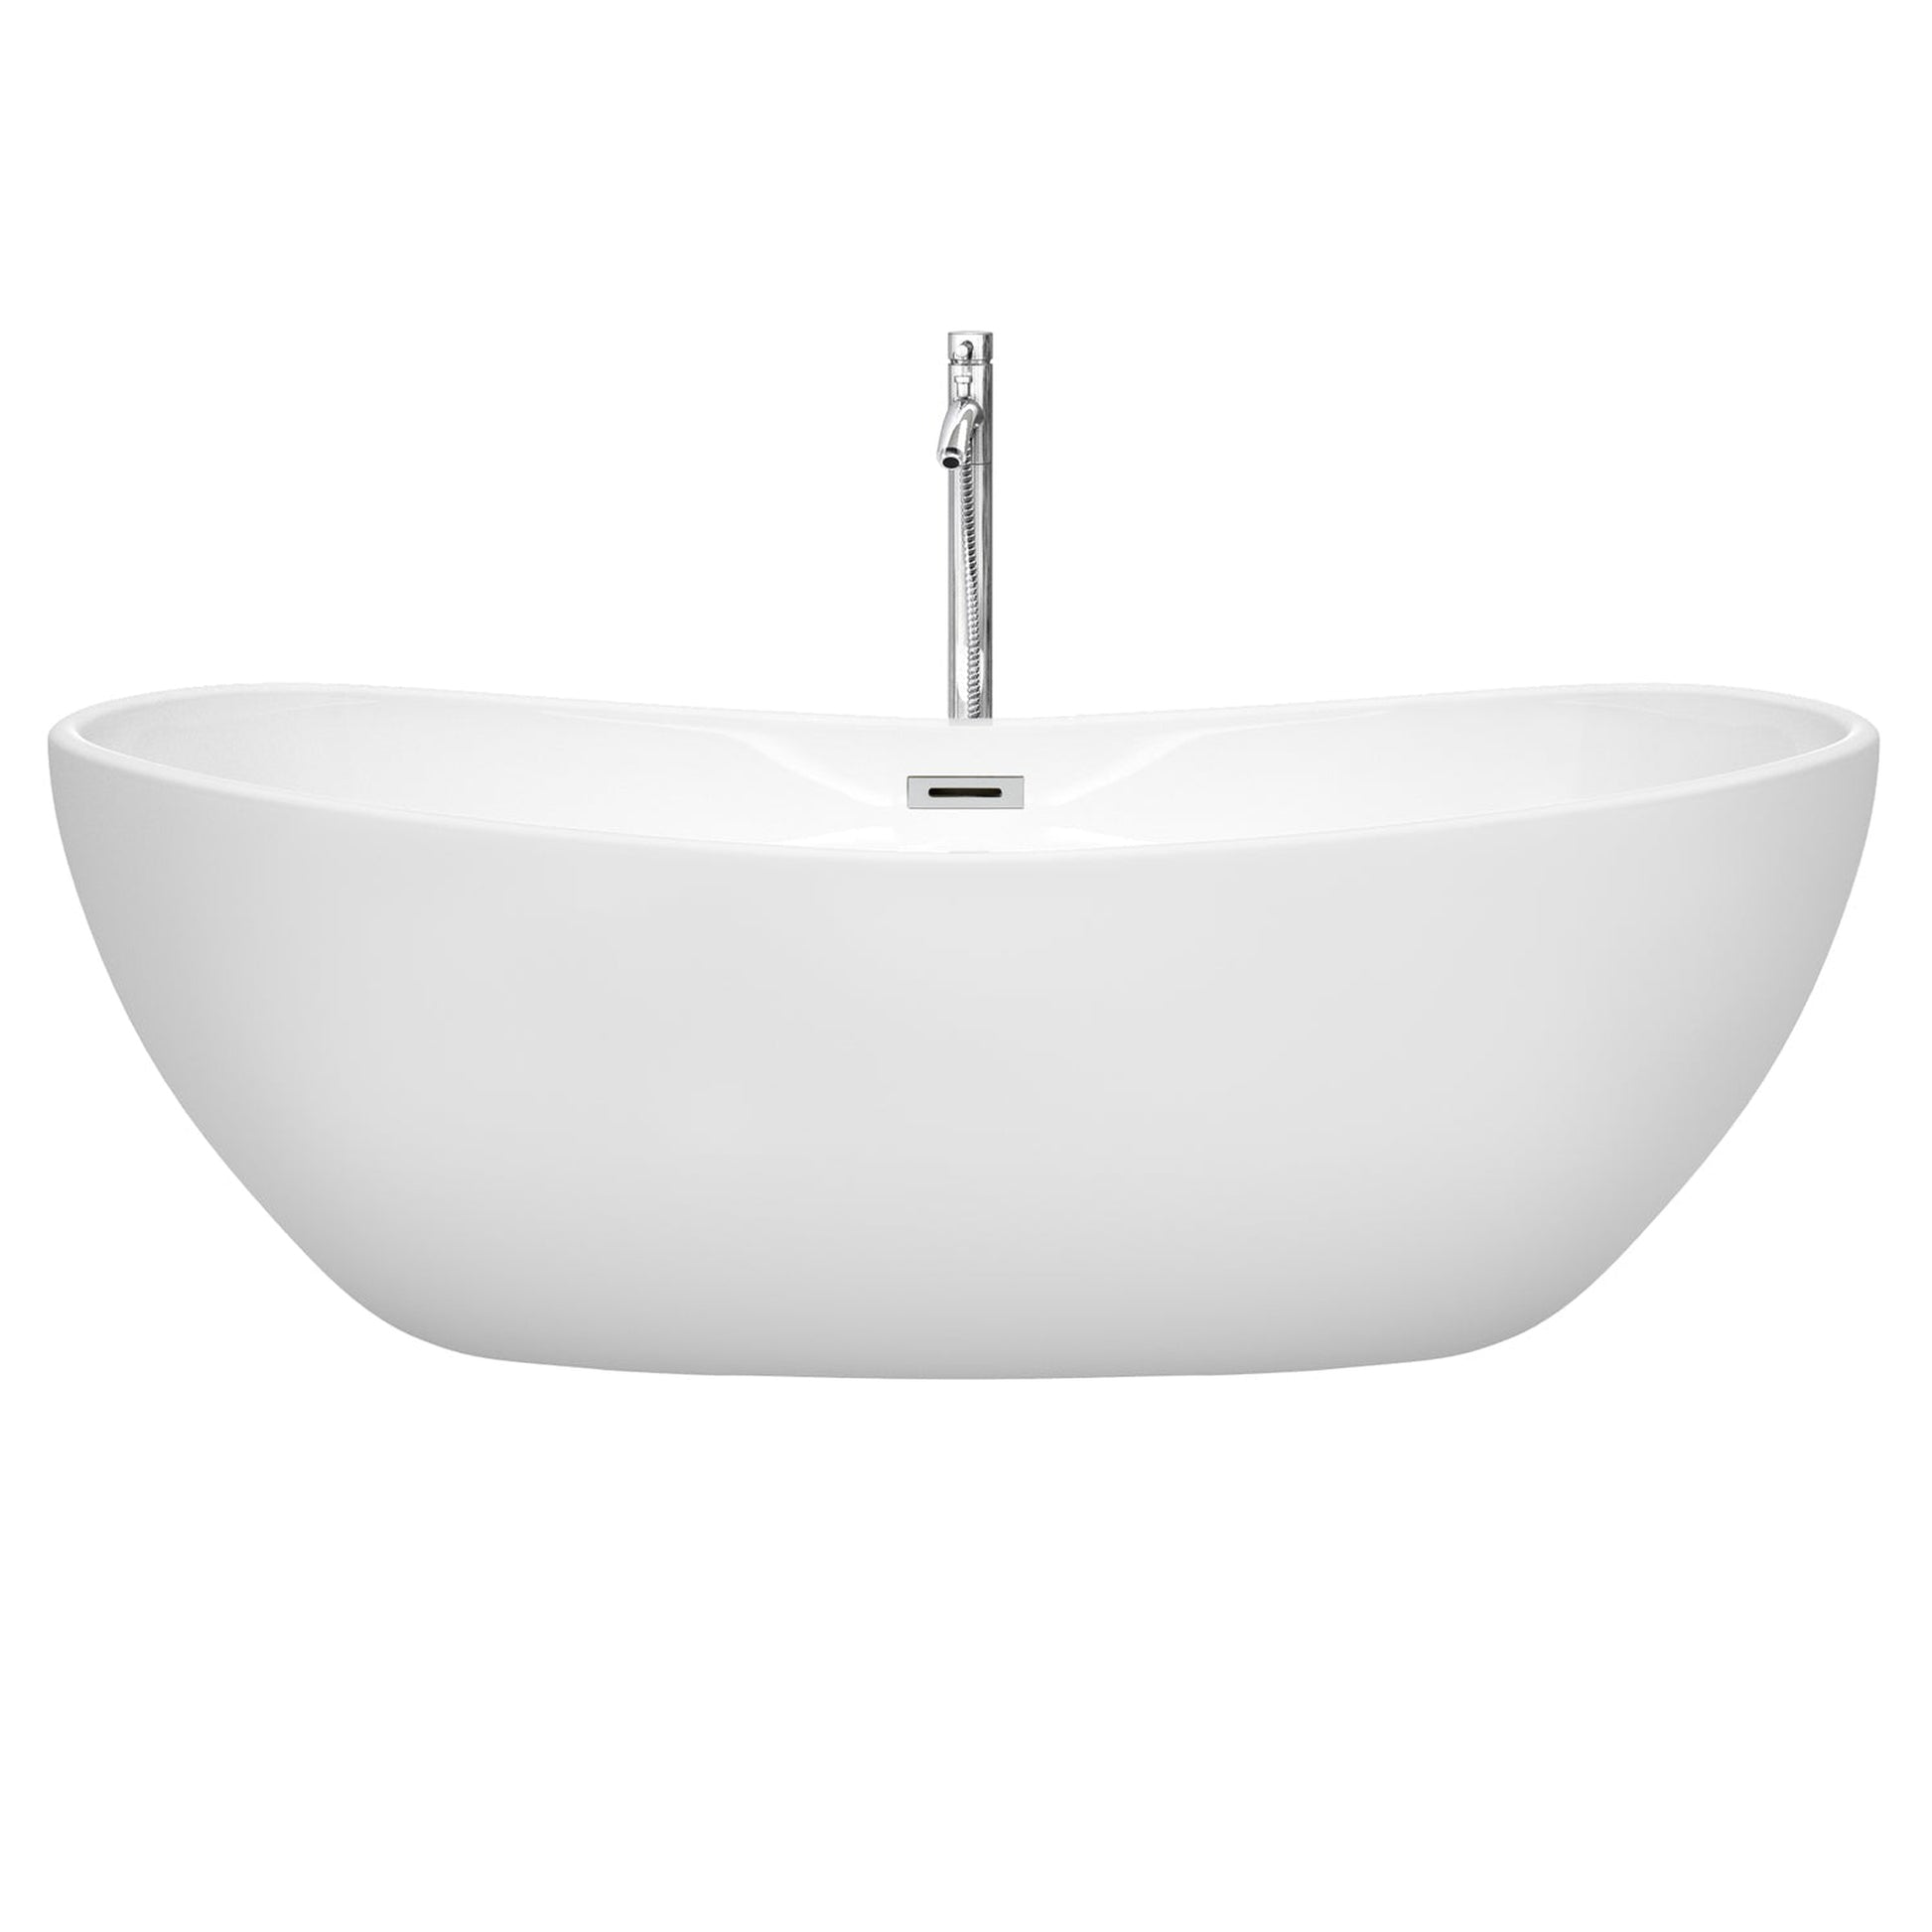 Wyndham Collection Rebecca 70" Freestanding Bathtub in White With Floor Mounted Faucet, Drain and Overflow Trim in Polished Chrome